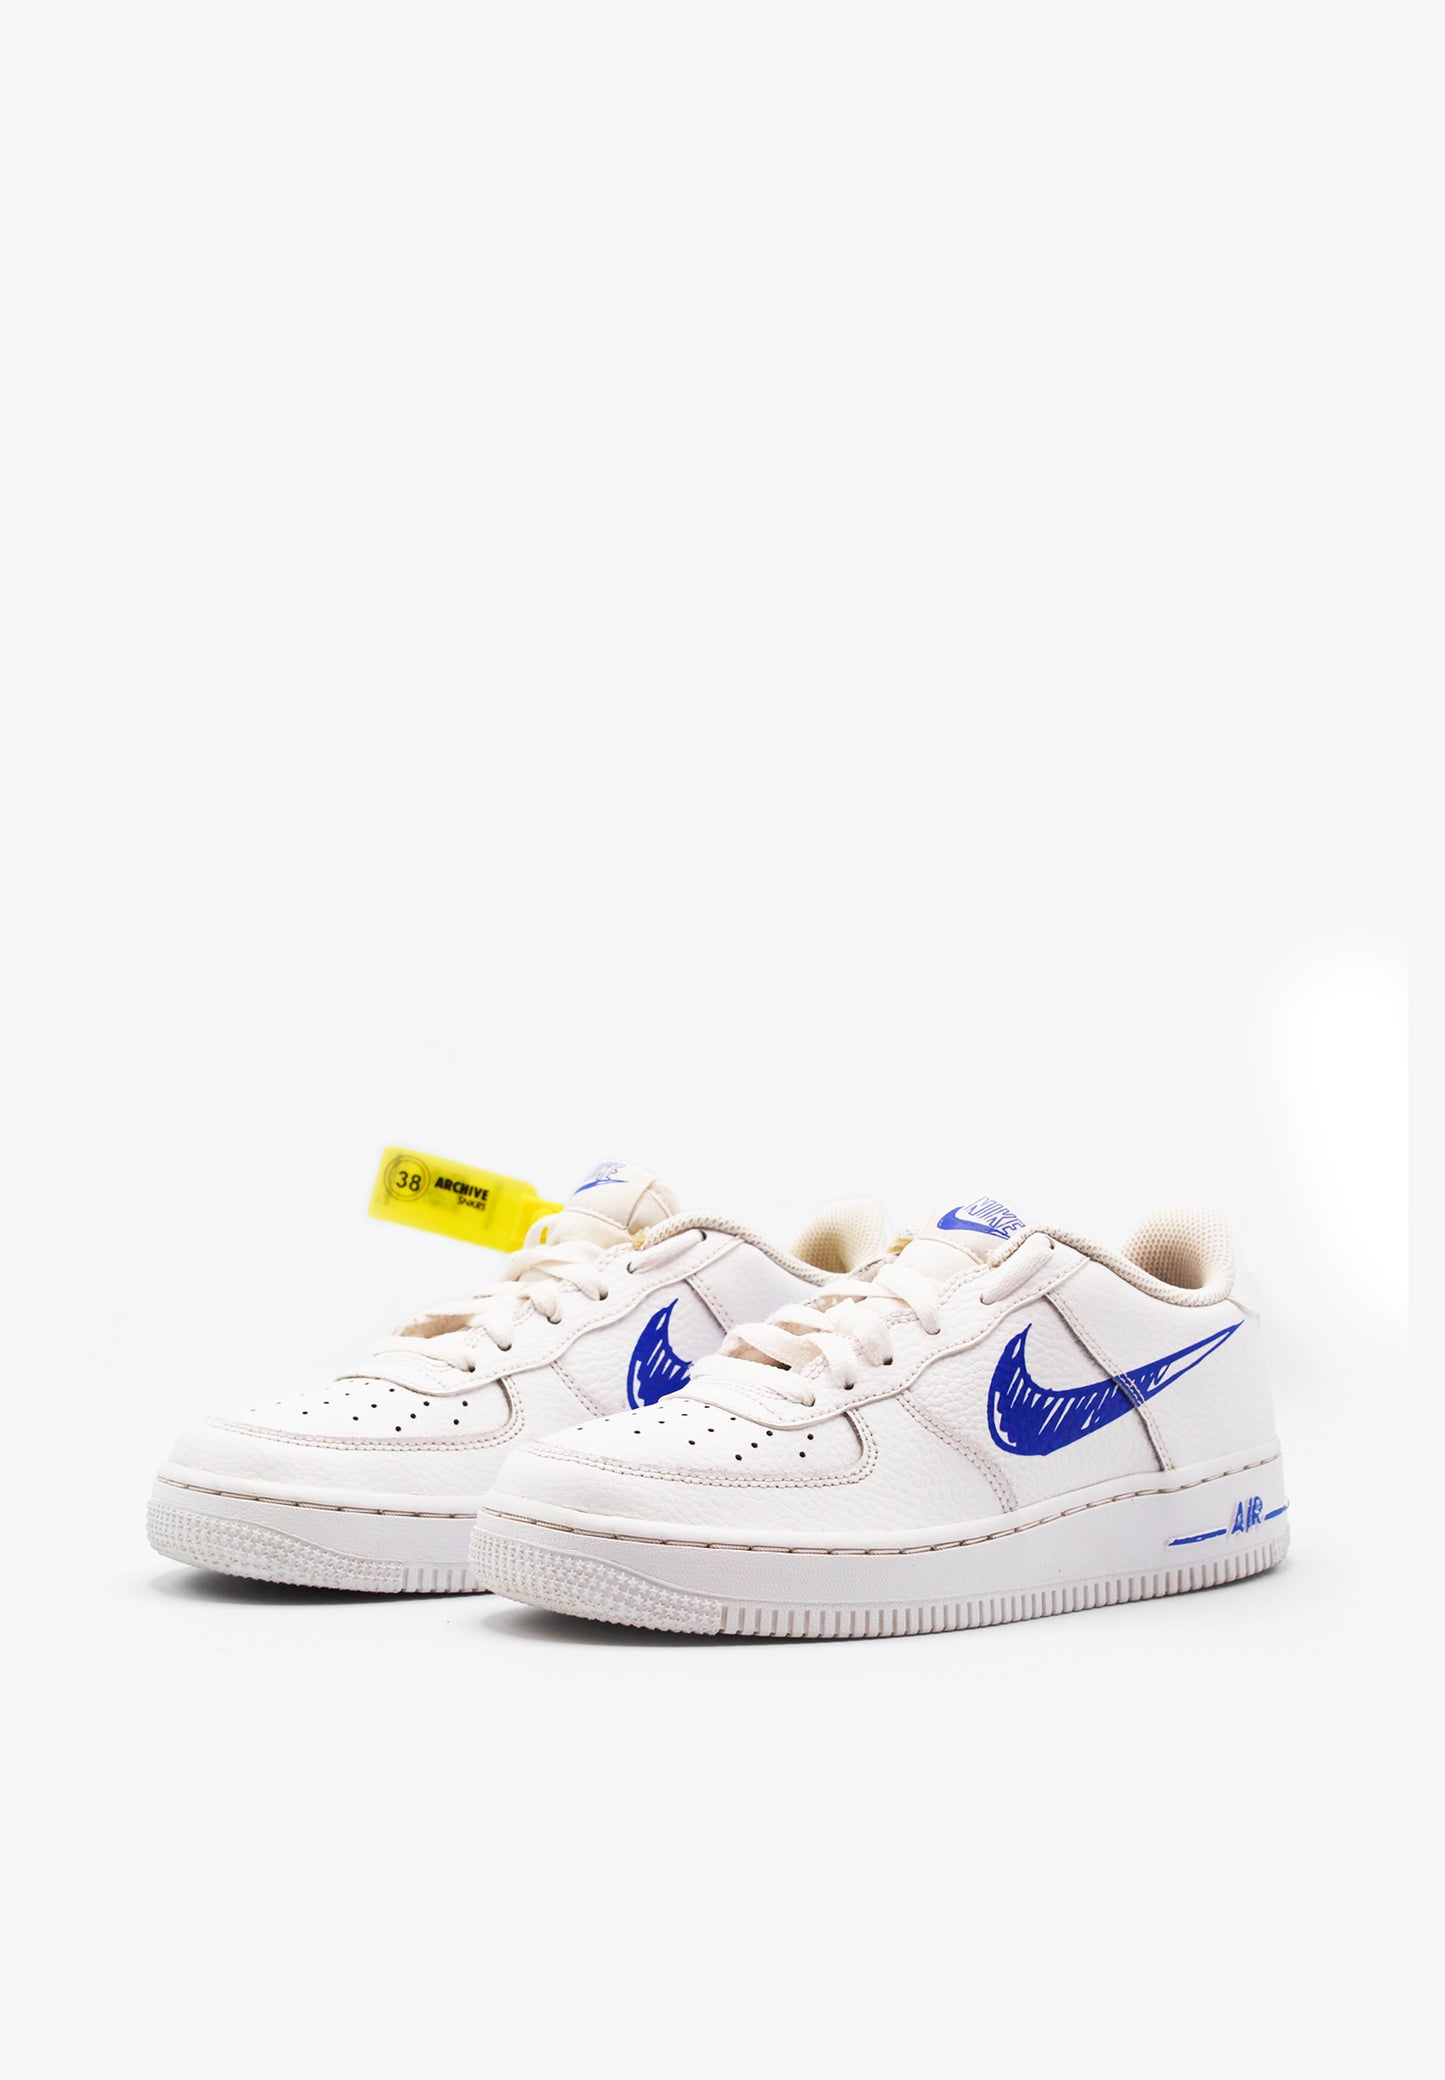 ARCHIVE SNEAKRS | SNEAKERS NIKE AIR FORCE 1 LOW SKETCH TALLA 38